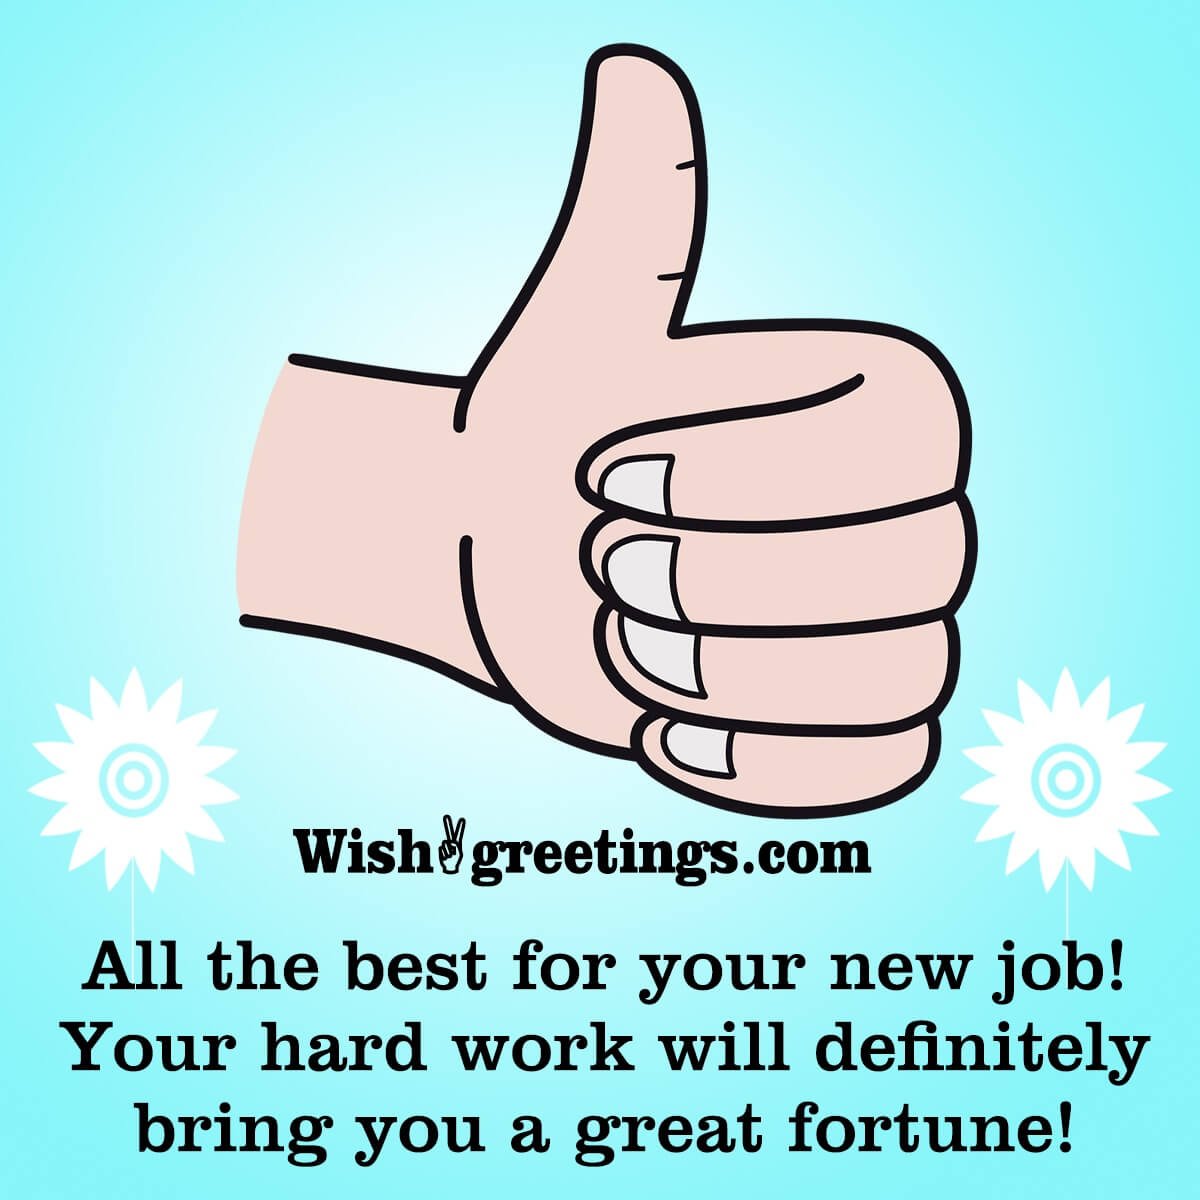 All The Best For Your New Job!